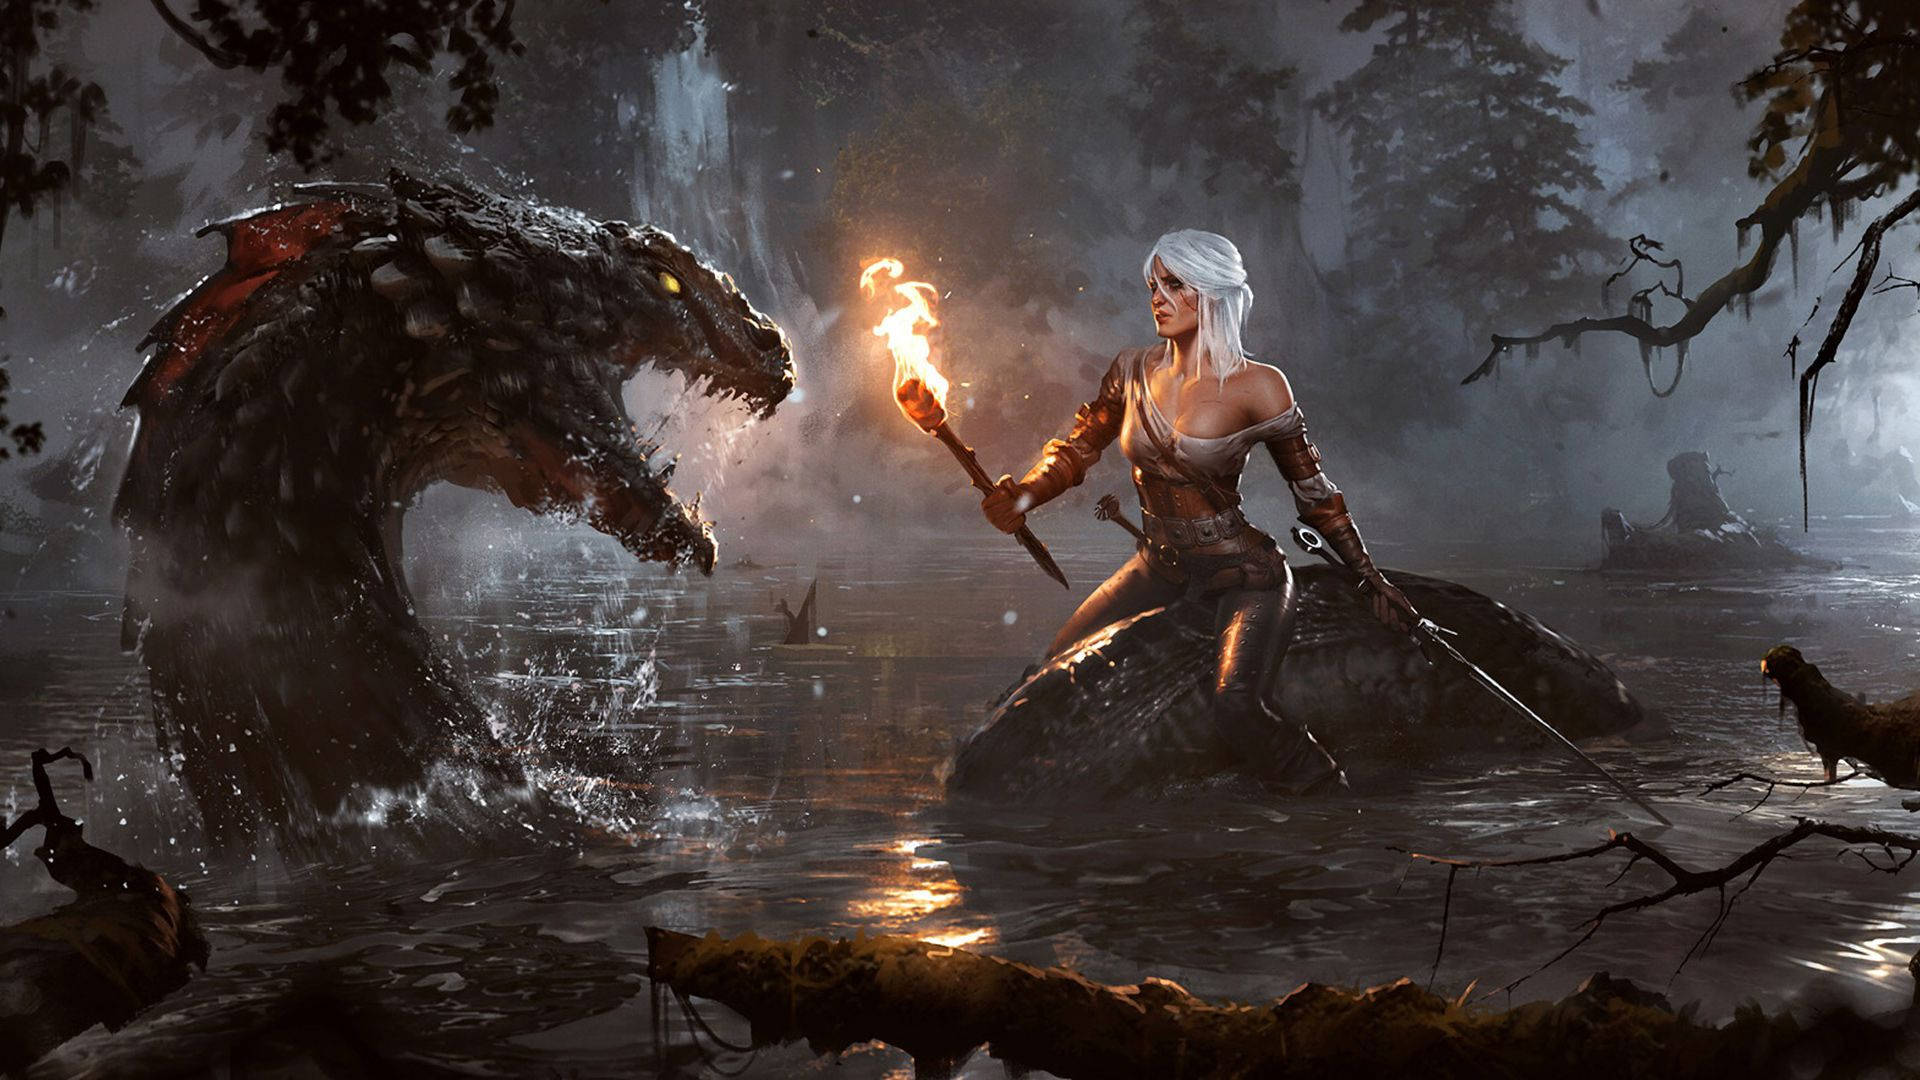 The Witcher 3 - A Woman Riding A Dragon In The Water Background